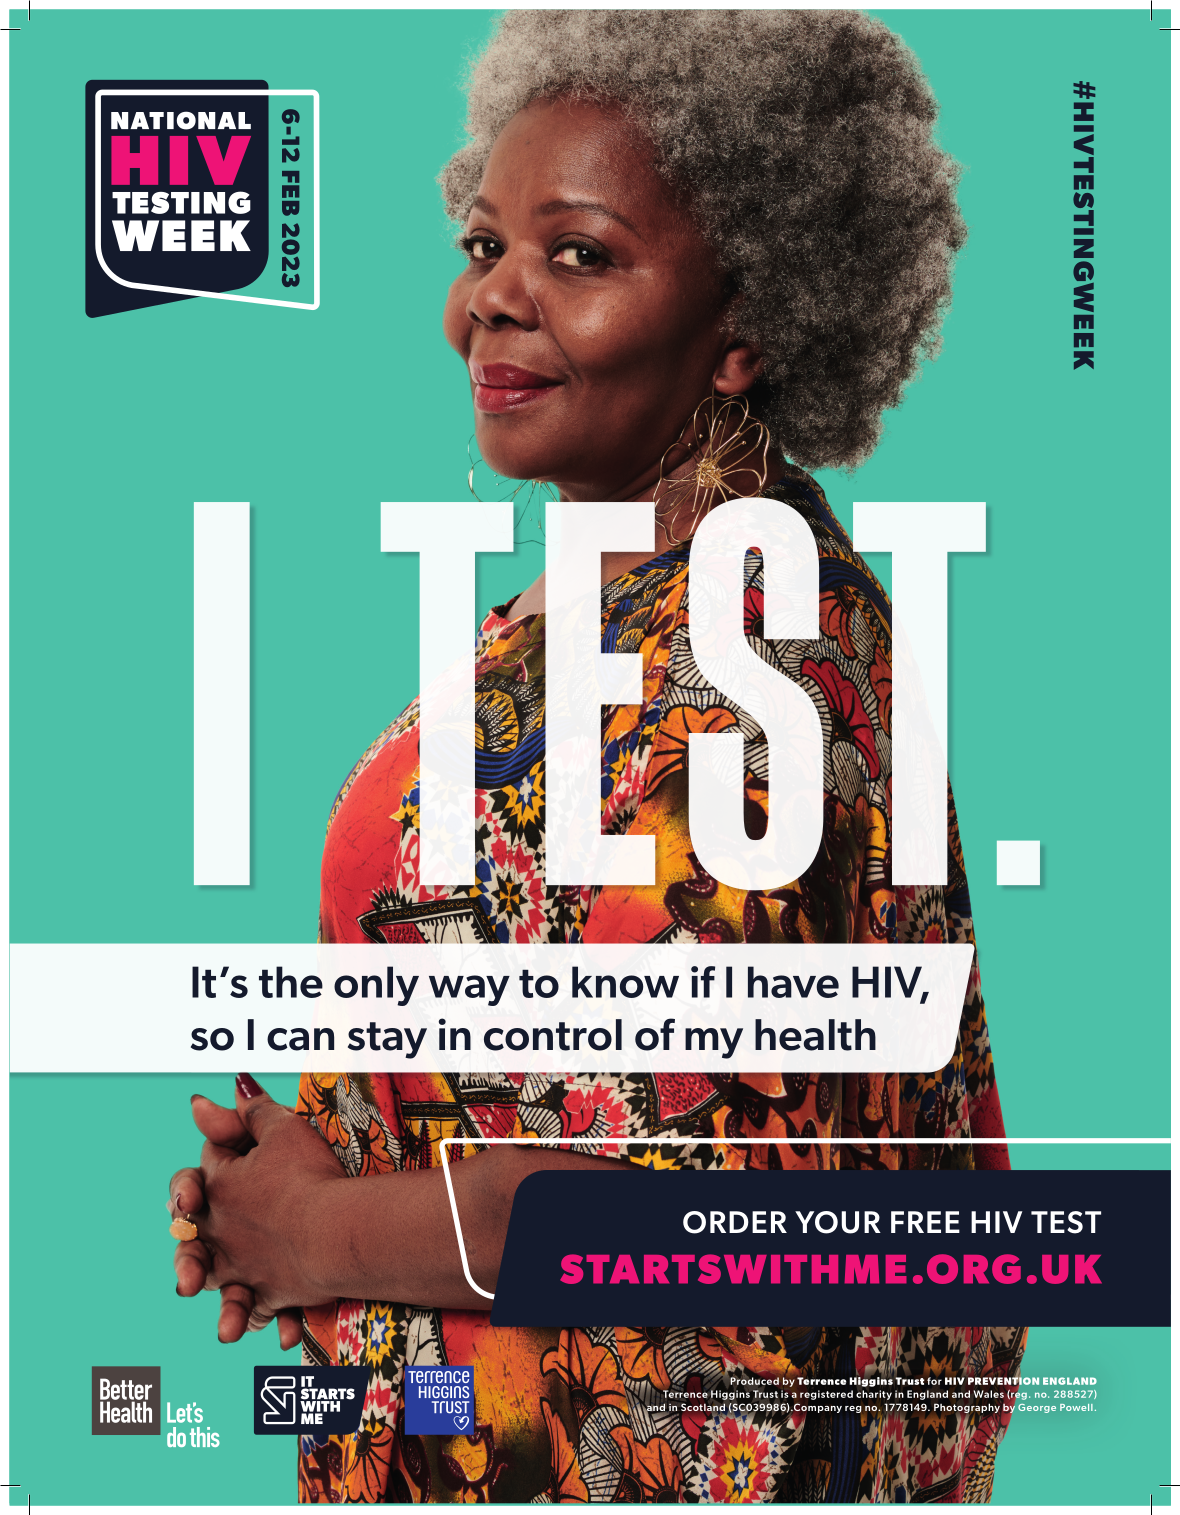 Terrence-Higgins https://www.tht.org.uk/hiv-and-sexual-health